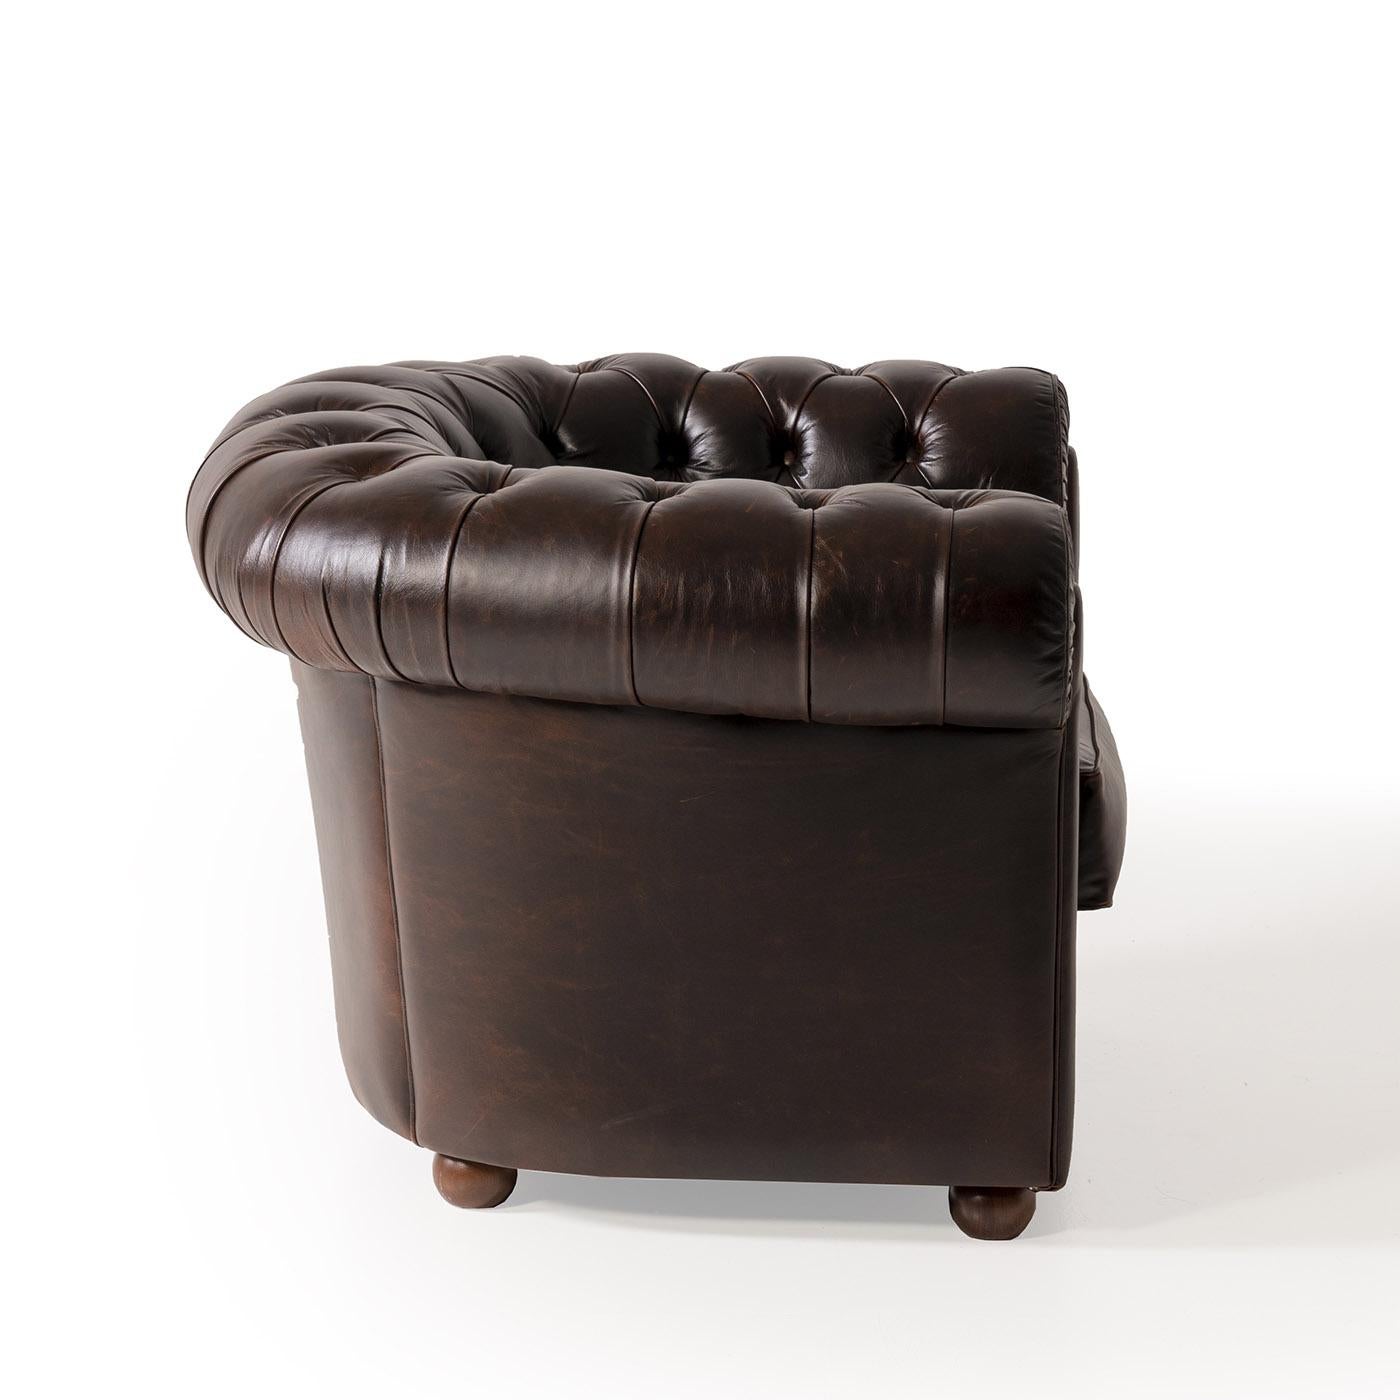 The Chesterfield armchair is an icon of the world of the leather lounge, a timeless classic in the world of upholstery. A Mantellassi Chesterfield armchair is an eternal artwork that you will take into your home and admire every day for the rest of